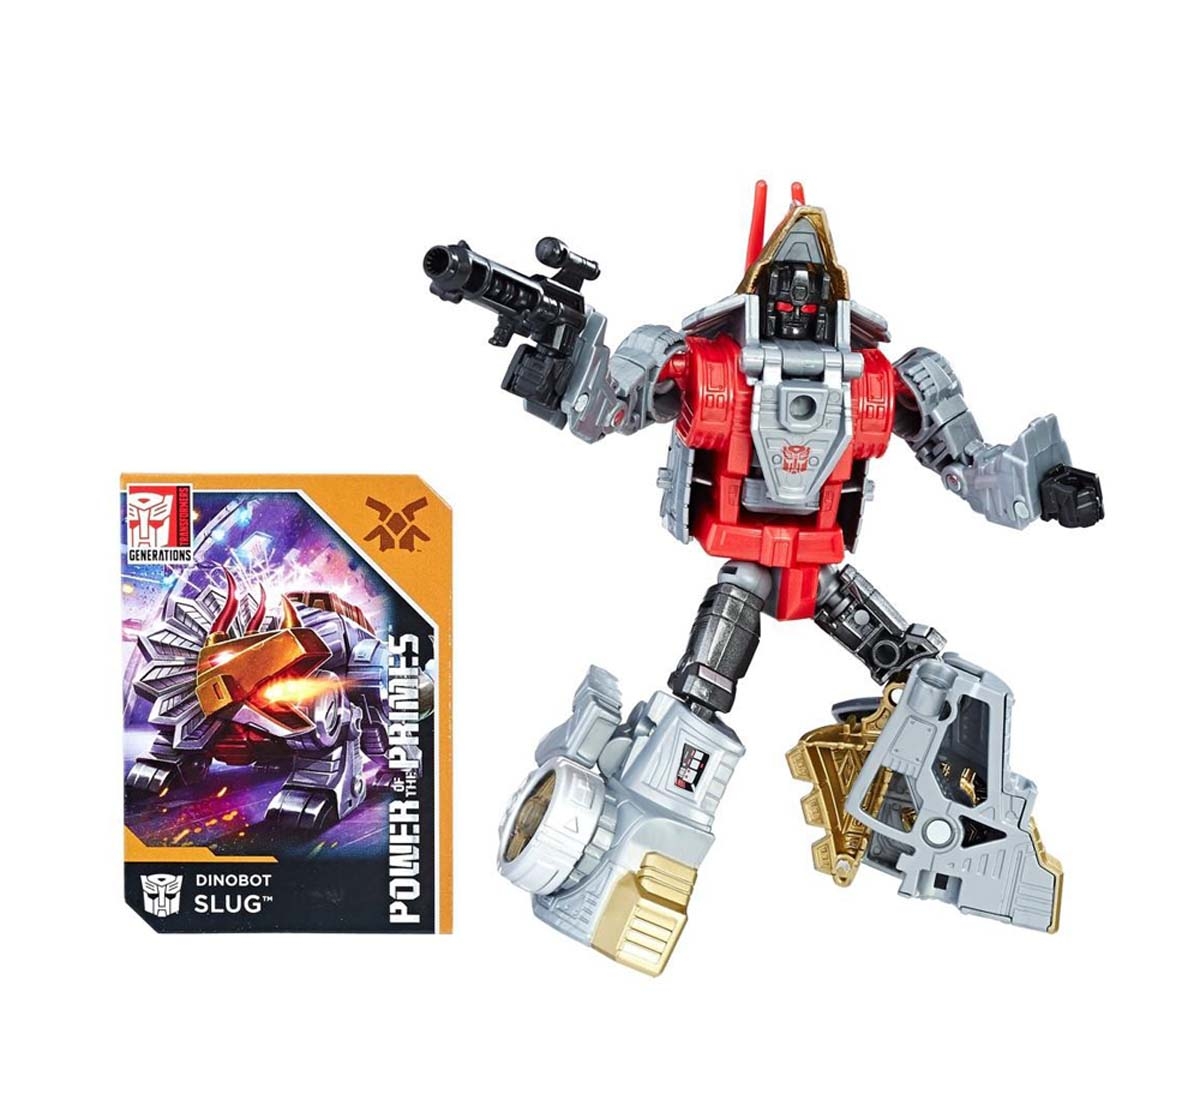 Transformers | Transformers Deluxe Action Figure Assorted Action Figures for Kids Age 8Y+ 2